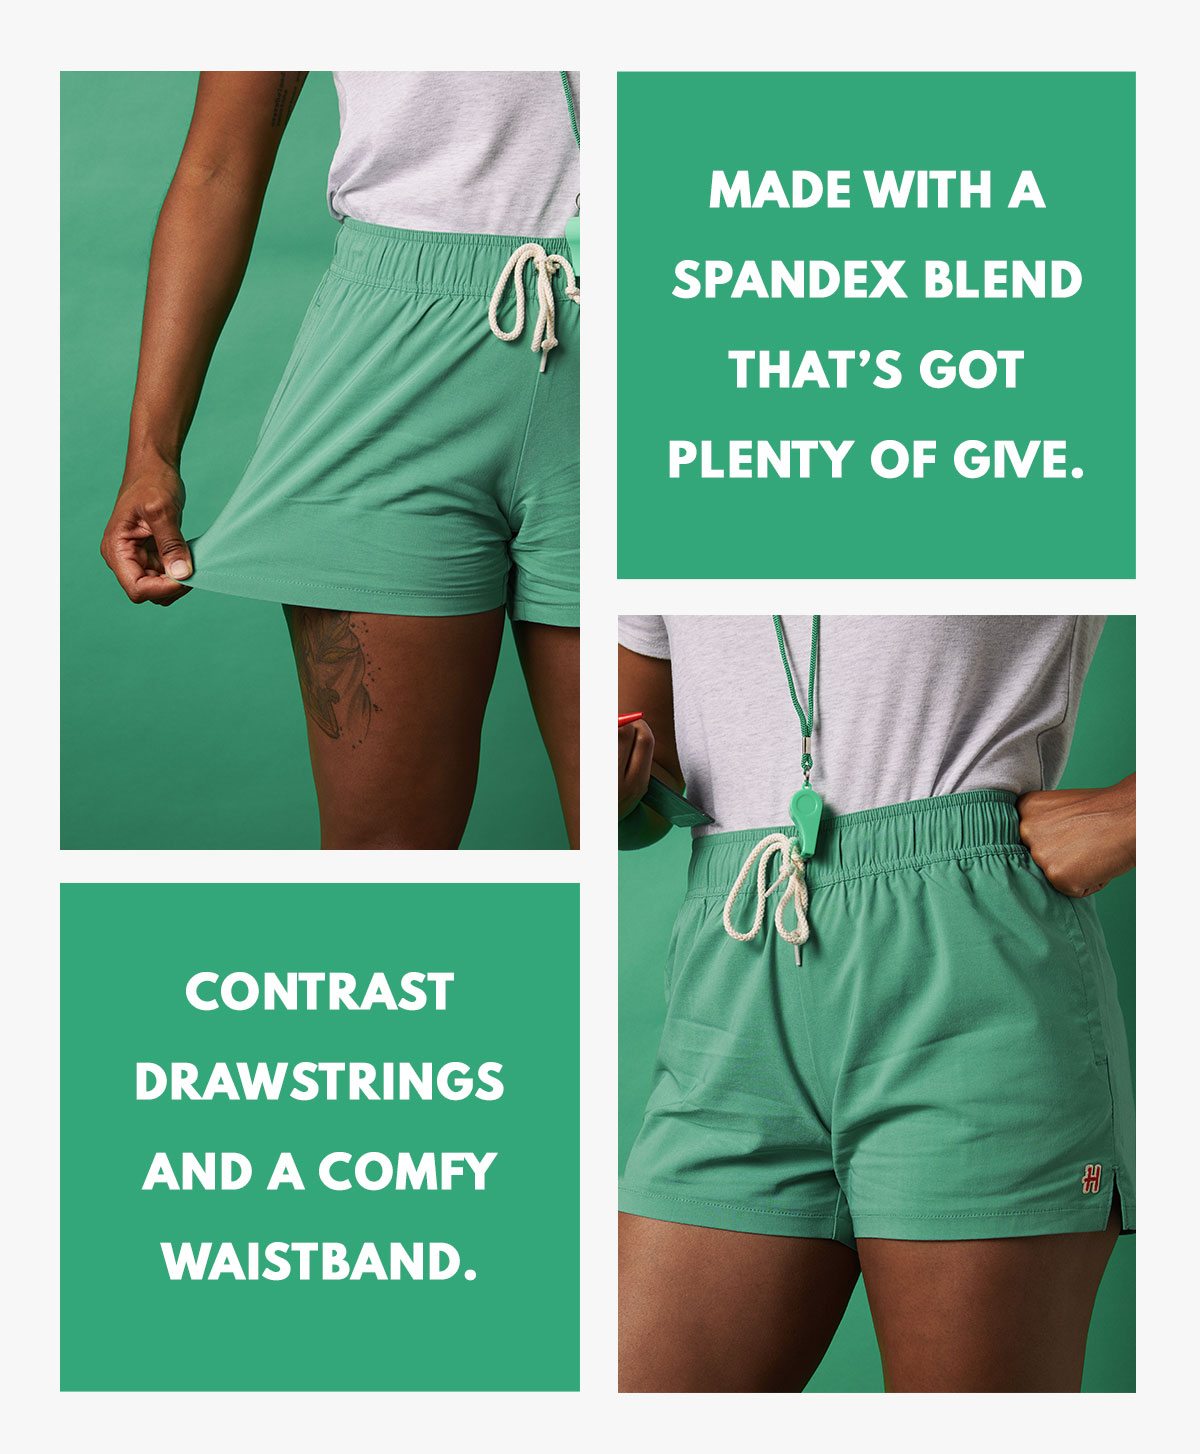 made with a spandex blend that’s got plenty of give. Contrast drawstrings and a comfy waistband. 